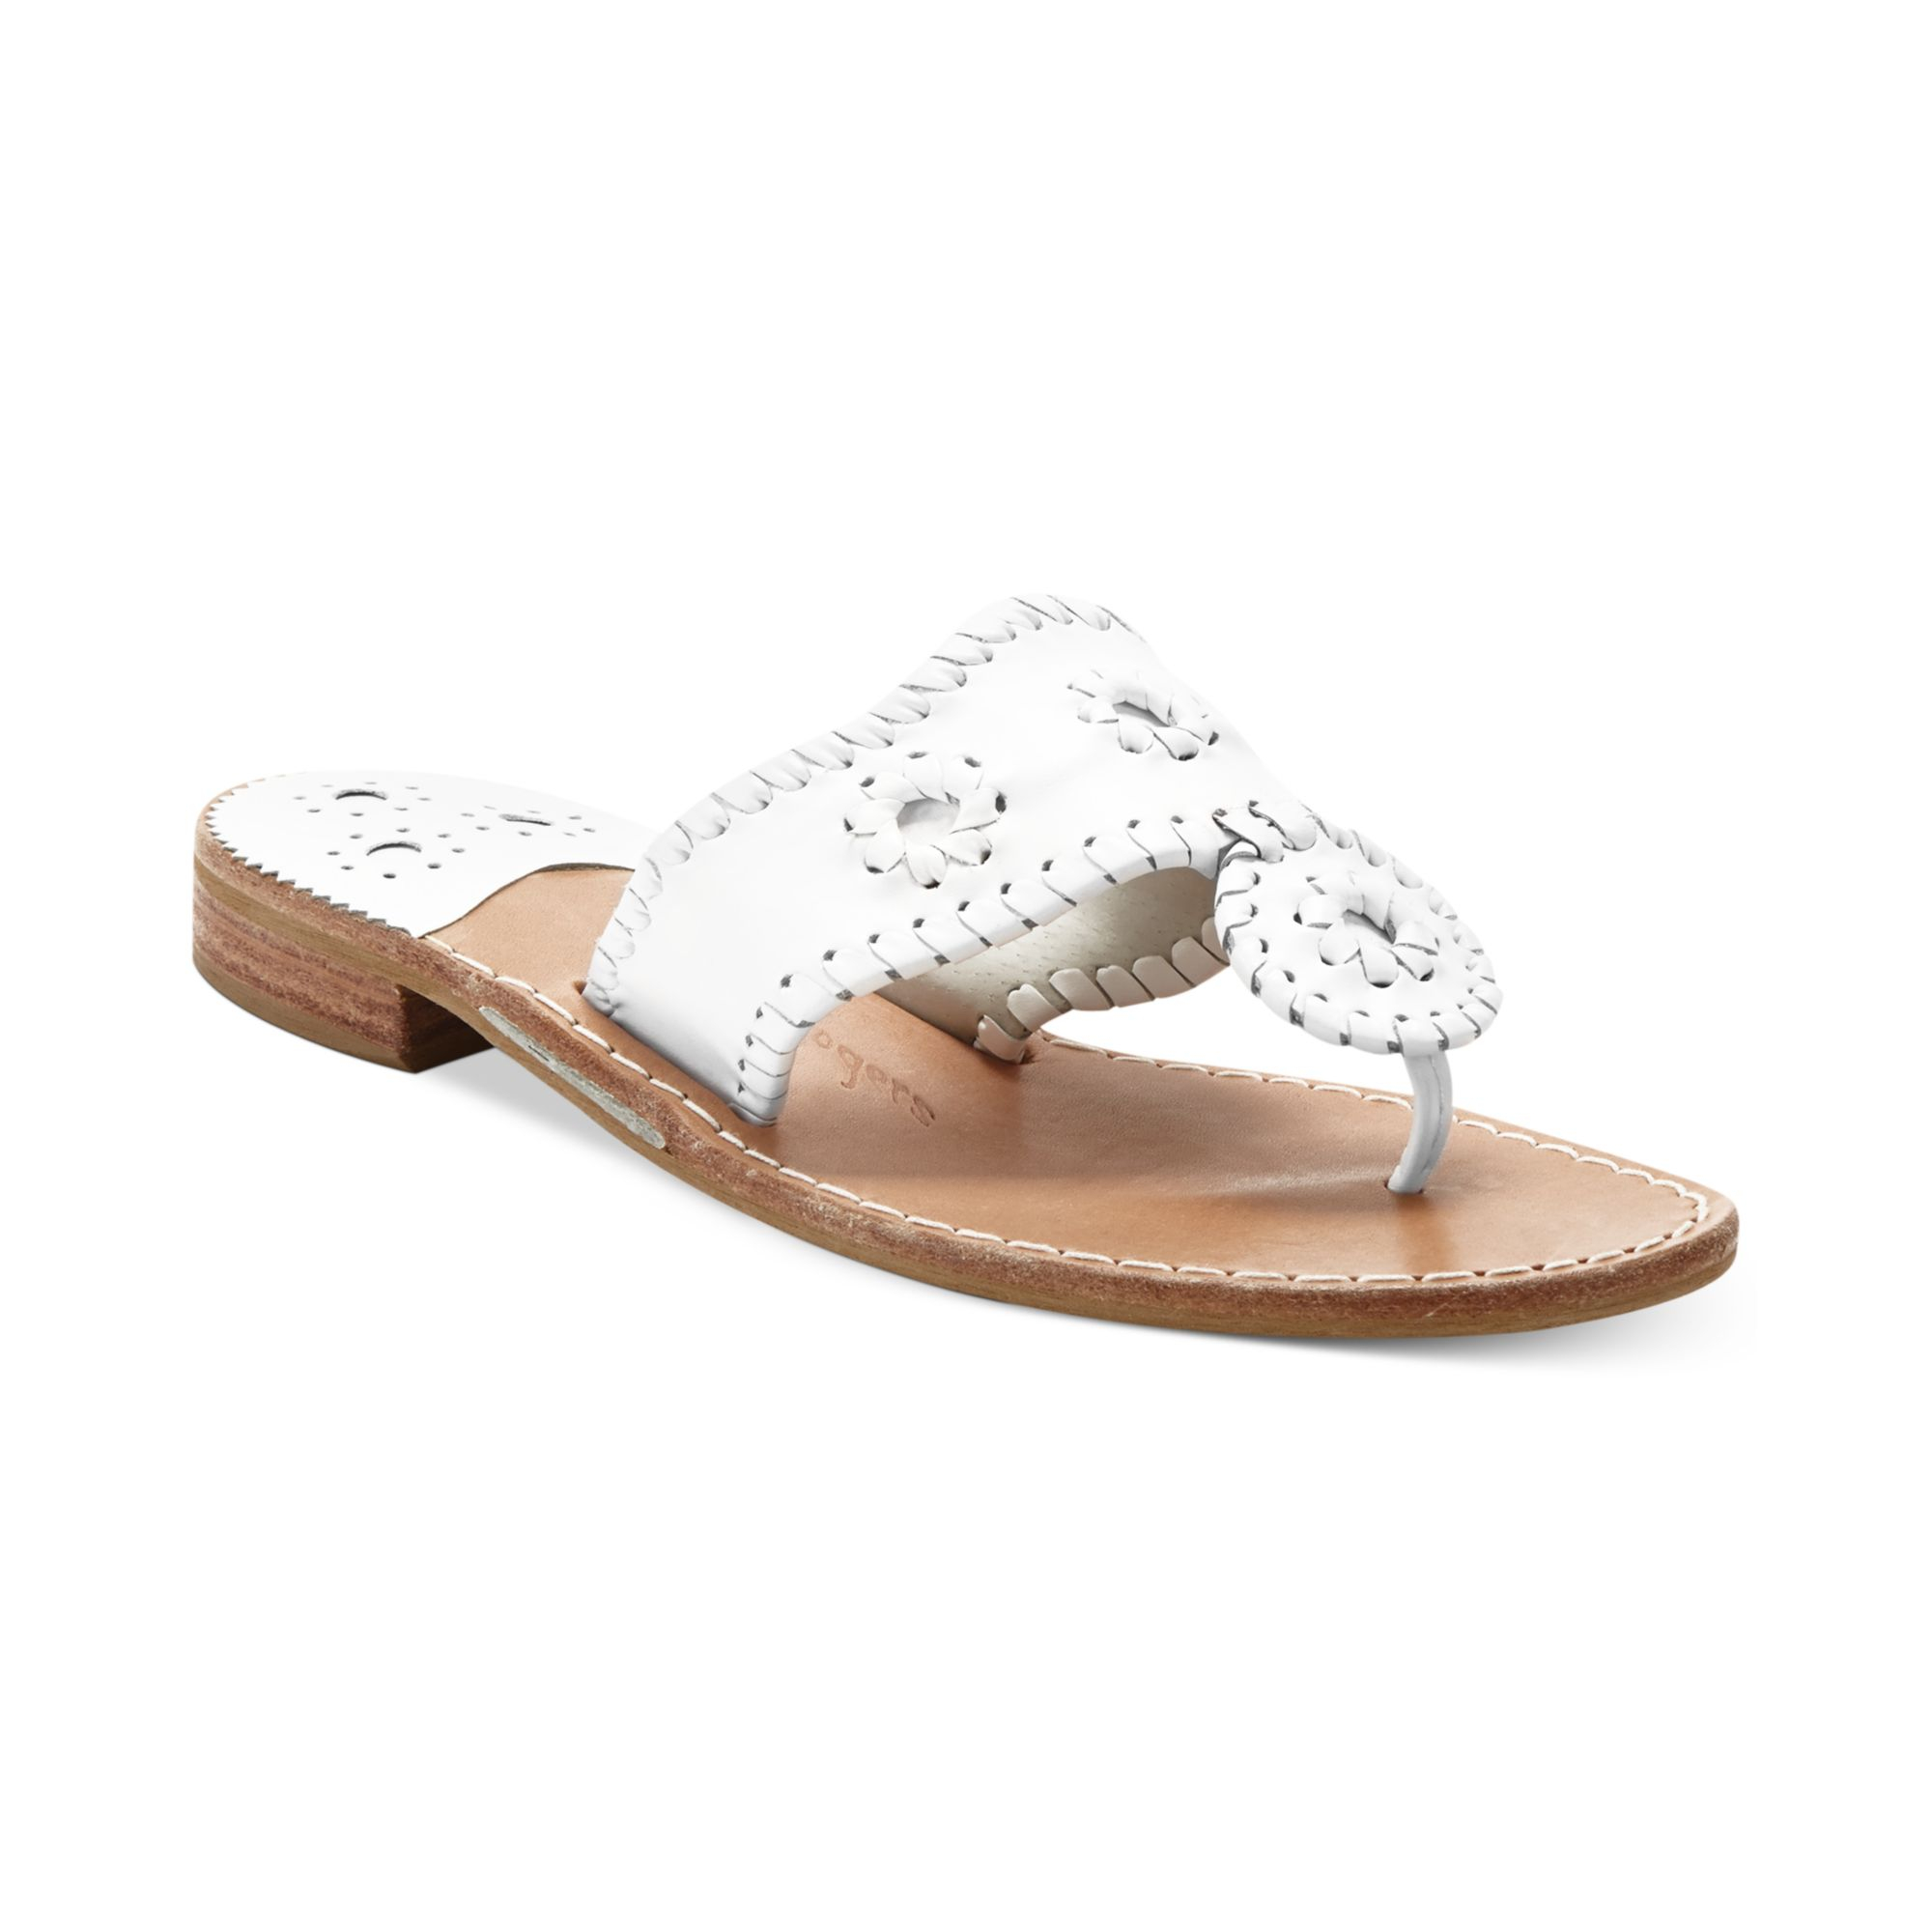 Jack Rogers Classic Palm Beach Flat Thong Sandals in White | Lyst